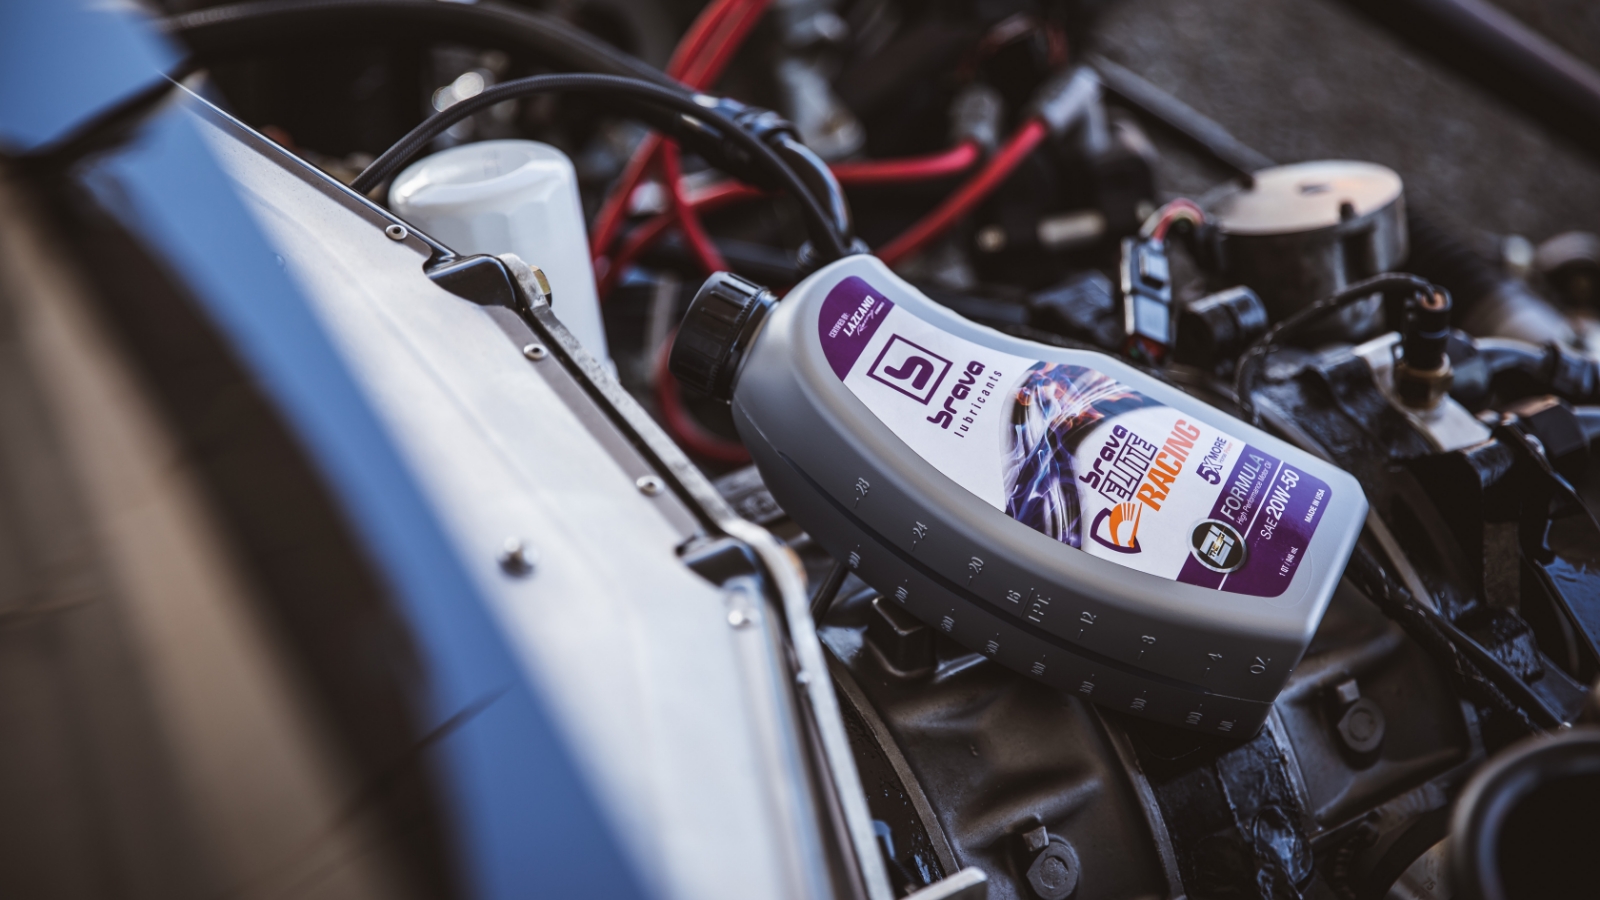 product bottle of brava elite racing oil featured on top of an engine